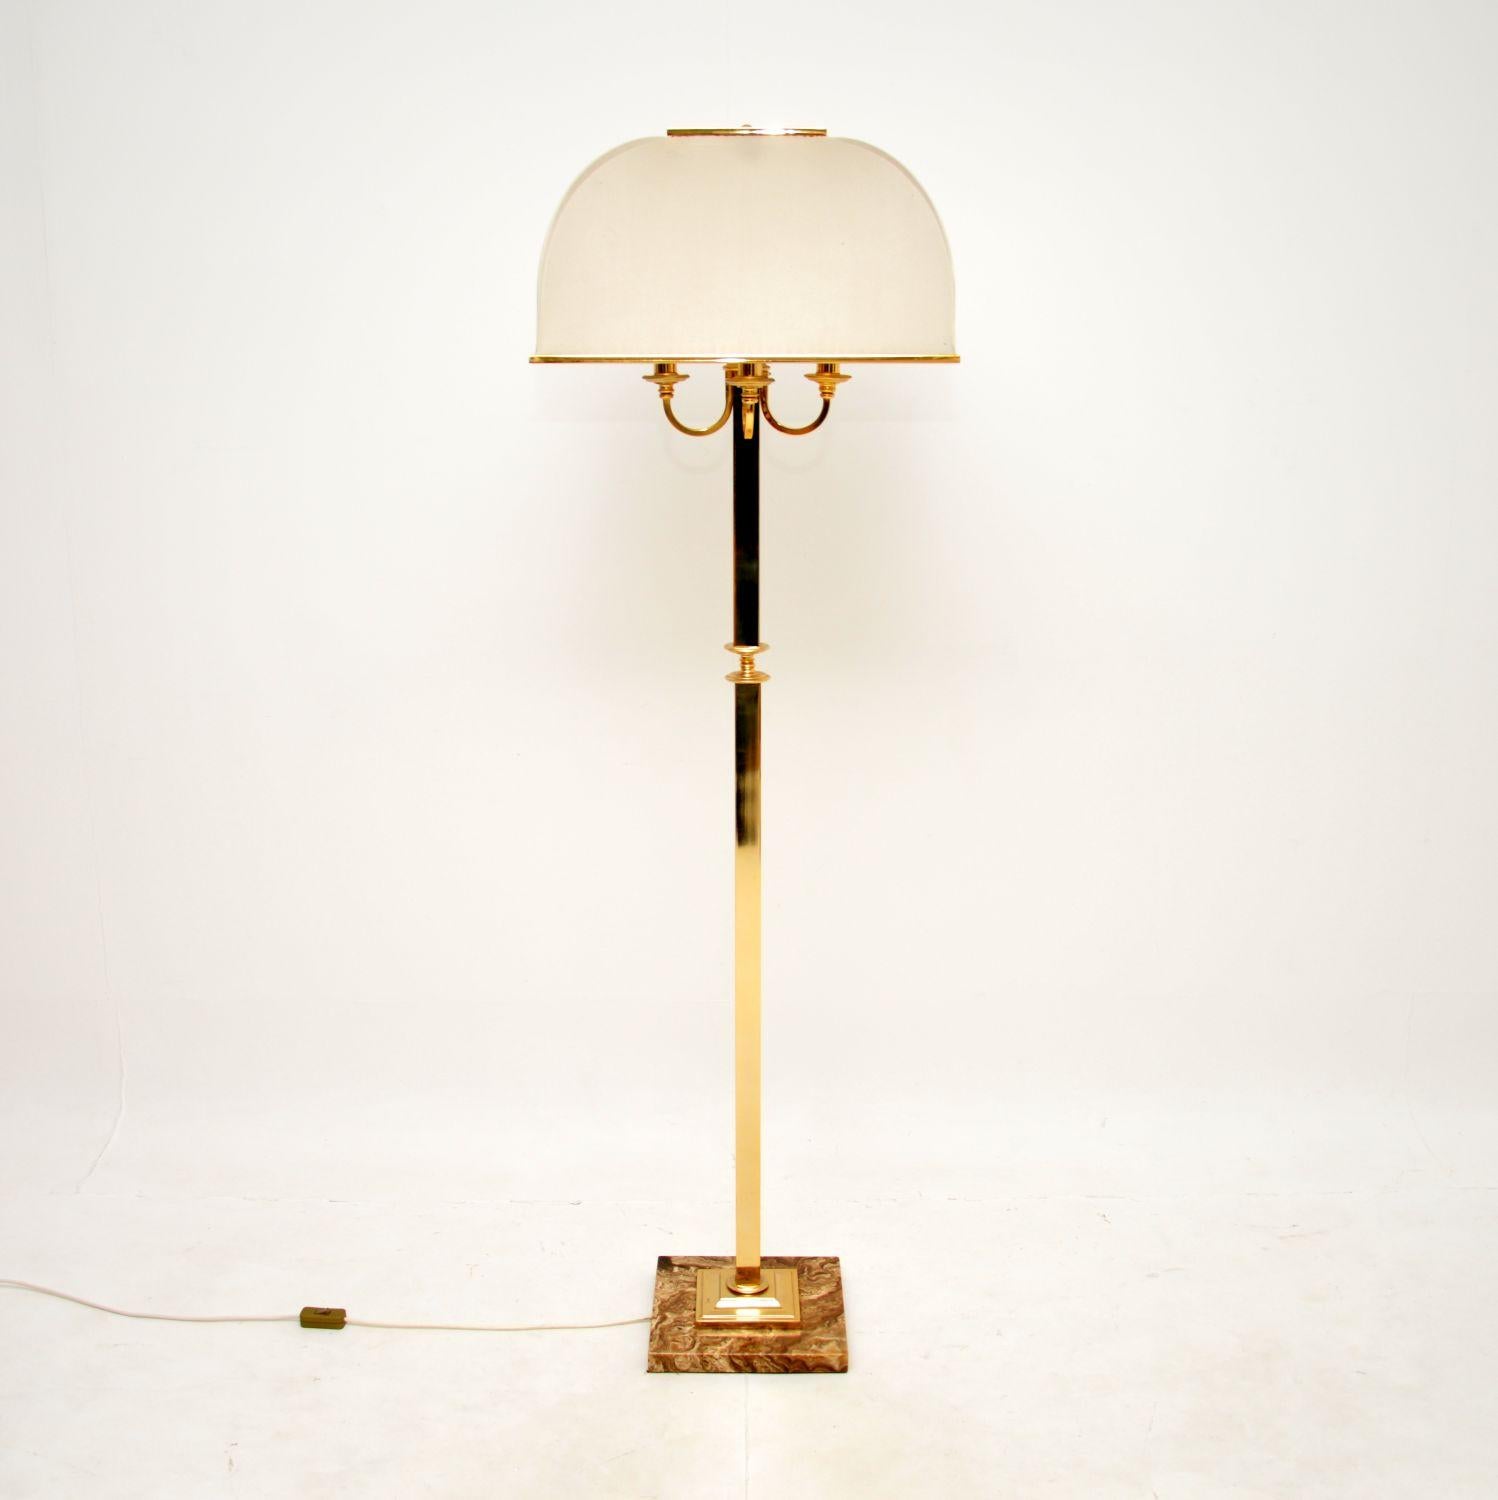 A stunning vintage brass and marble floor lamp, most likely made in Italy and dating from the 1970’s.

It is beautifully made, the brass frame sits on a gorgeous marble base. There are four outswept bulb holders that sit below a very impressive